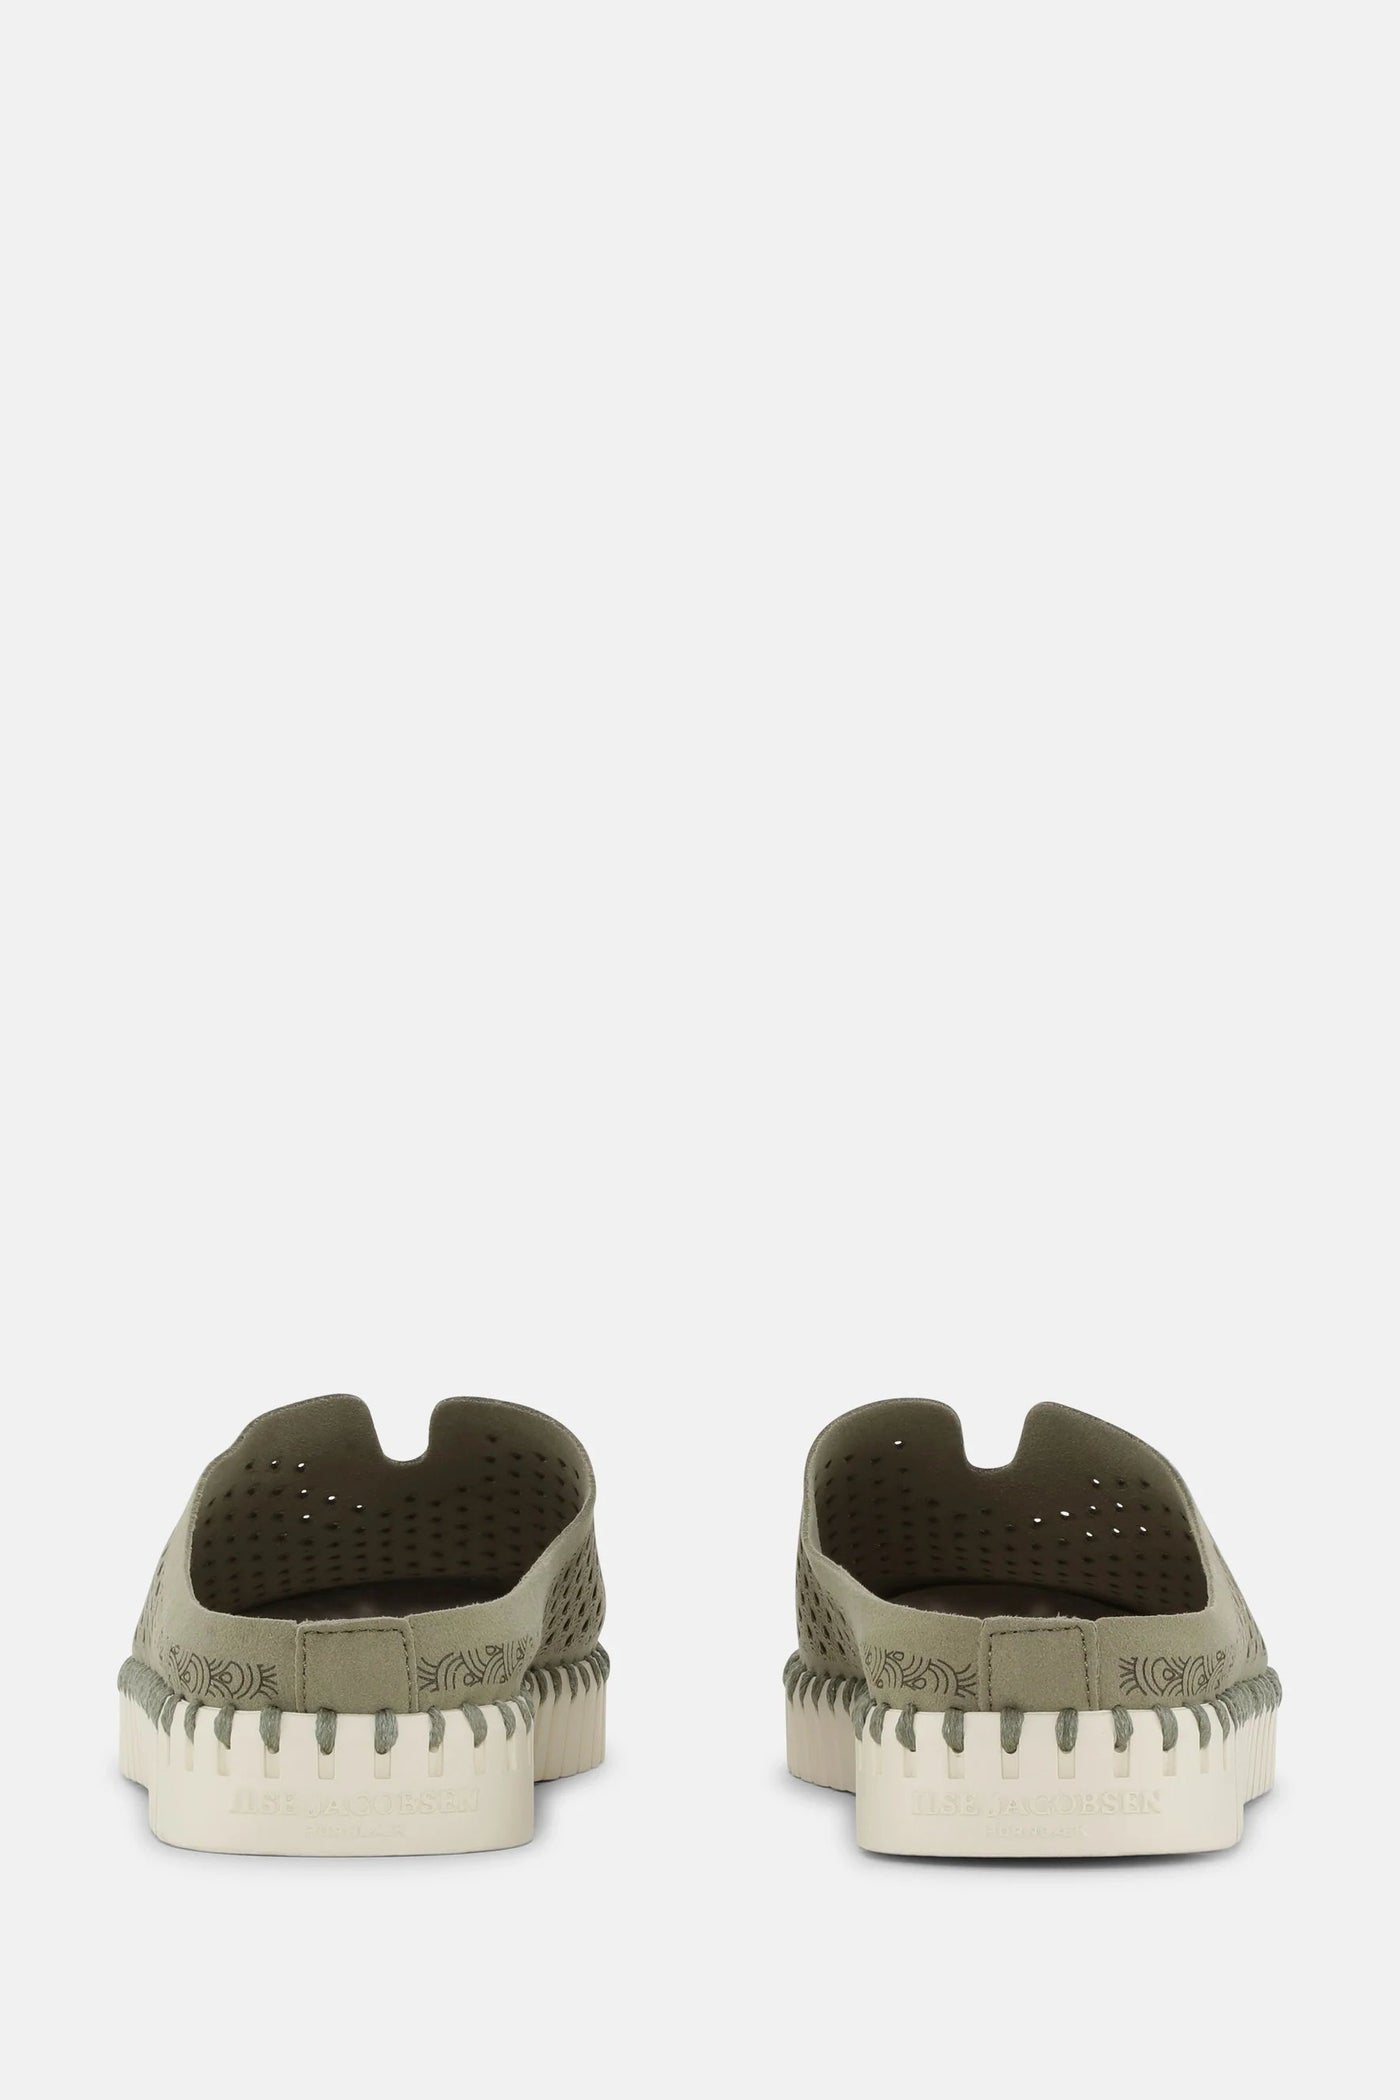 Ilse Jacobsen Tulip Slip On Shoes in Army-Accessories-Ohh! By Gum - Shop Sustainable